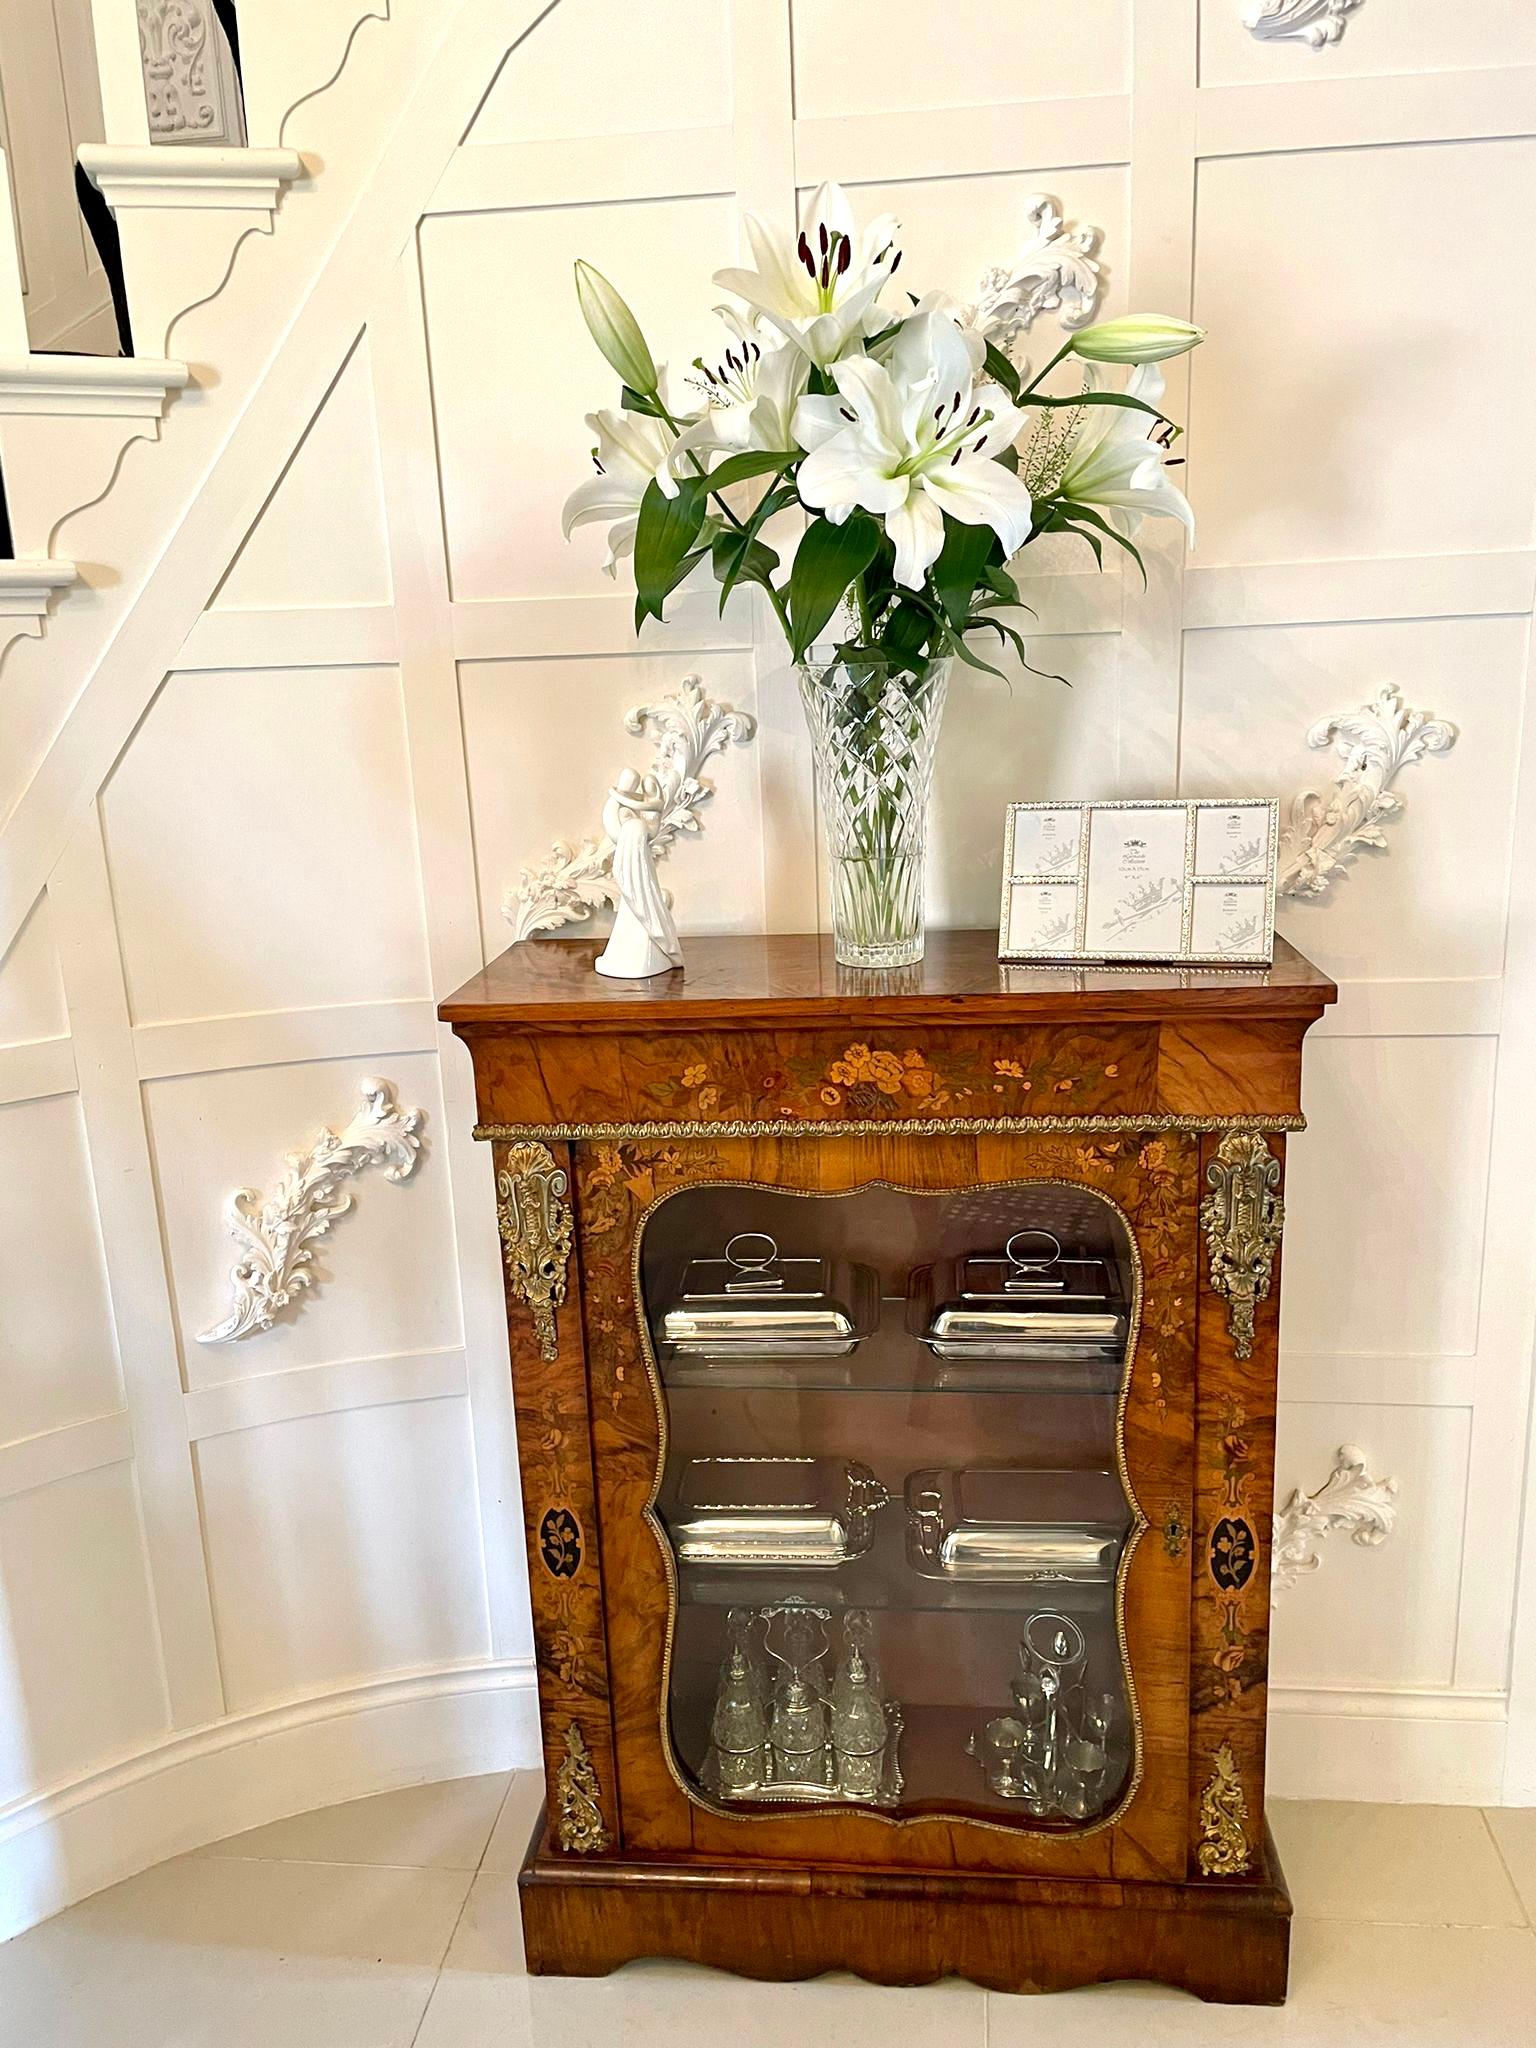 Fine quality antique Victorian burr walnut floral marquetry inlaid display cabinet having a quality burr walnut top and fantastic burr walnut floral marquetry inlaid frieze above a burr walnut floral marquetry inlaid shaped glazed door with ornate